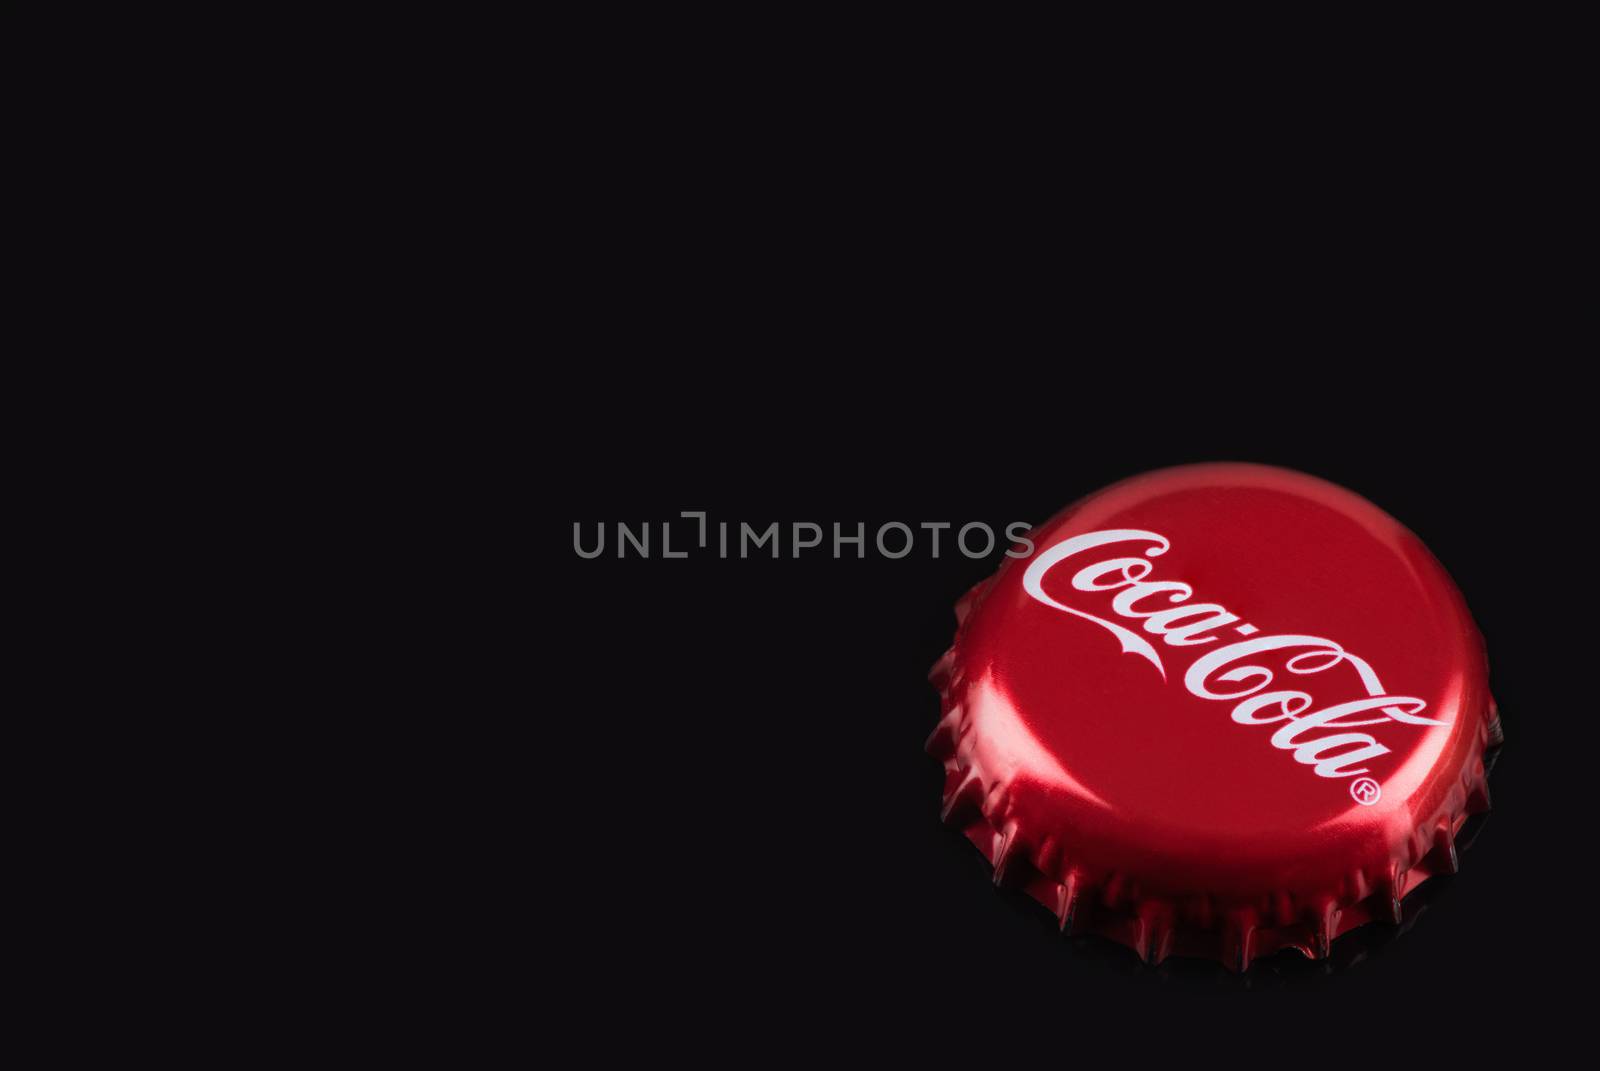 TARNOW, POLAND - FEBRUARY 01, 2020: Classic Red Coca-Cola Bottle Cap. Cocal-Cola is One of the Most Popular Refreshing Drinks.